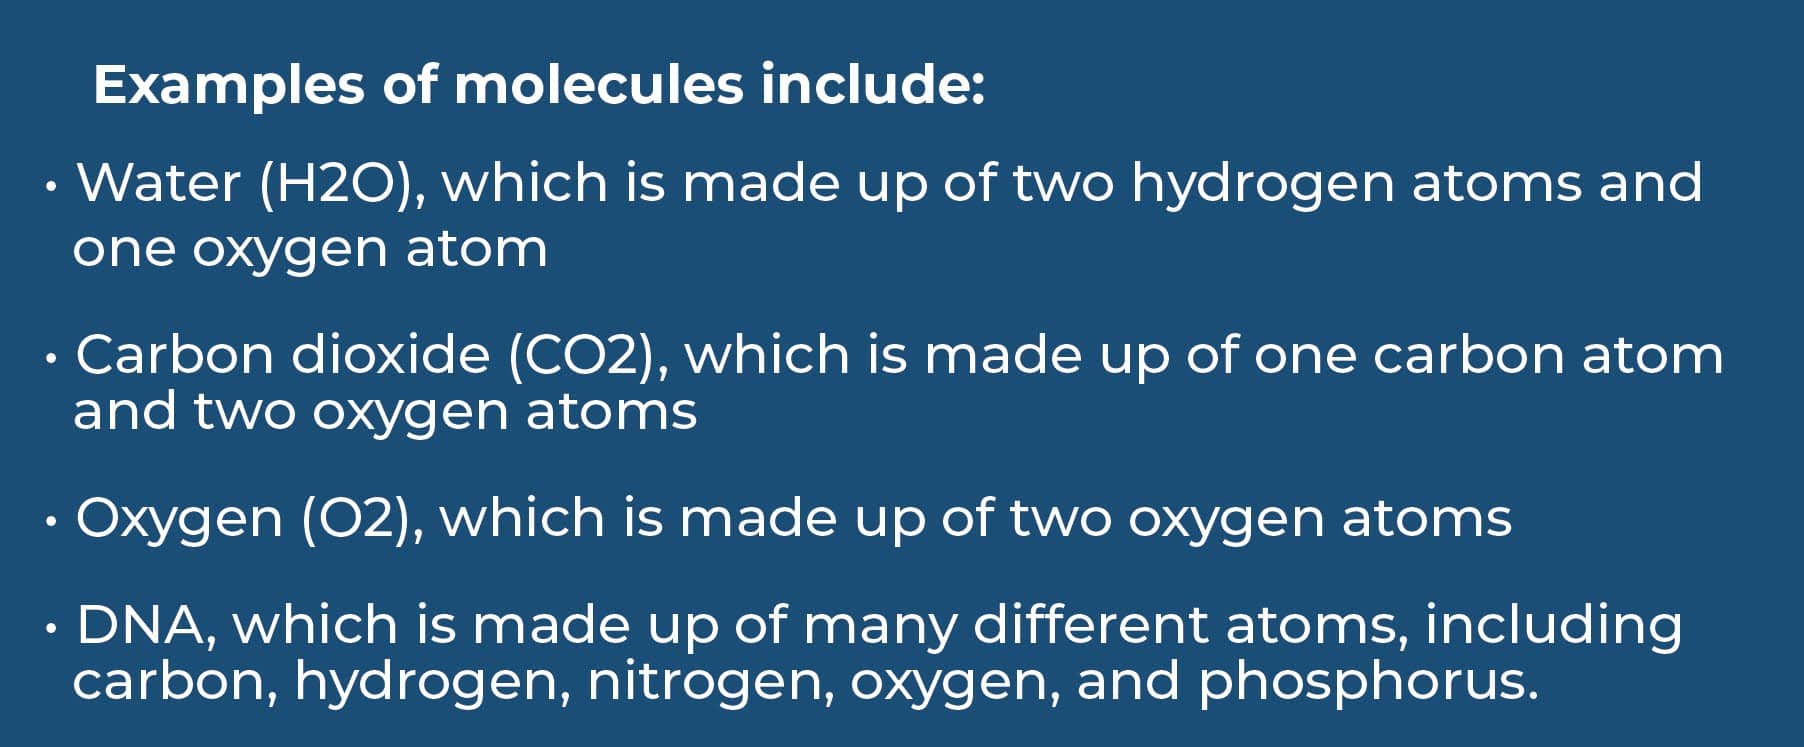 examples of molecules